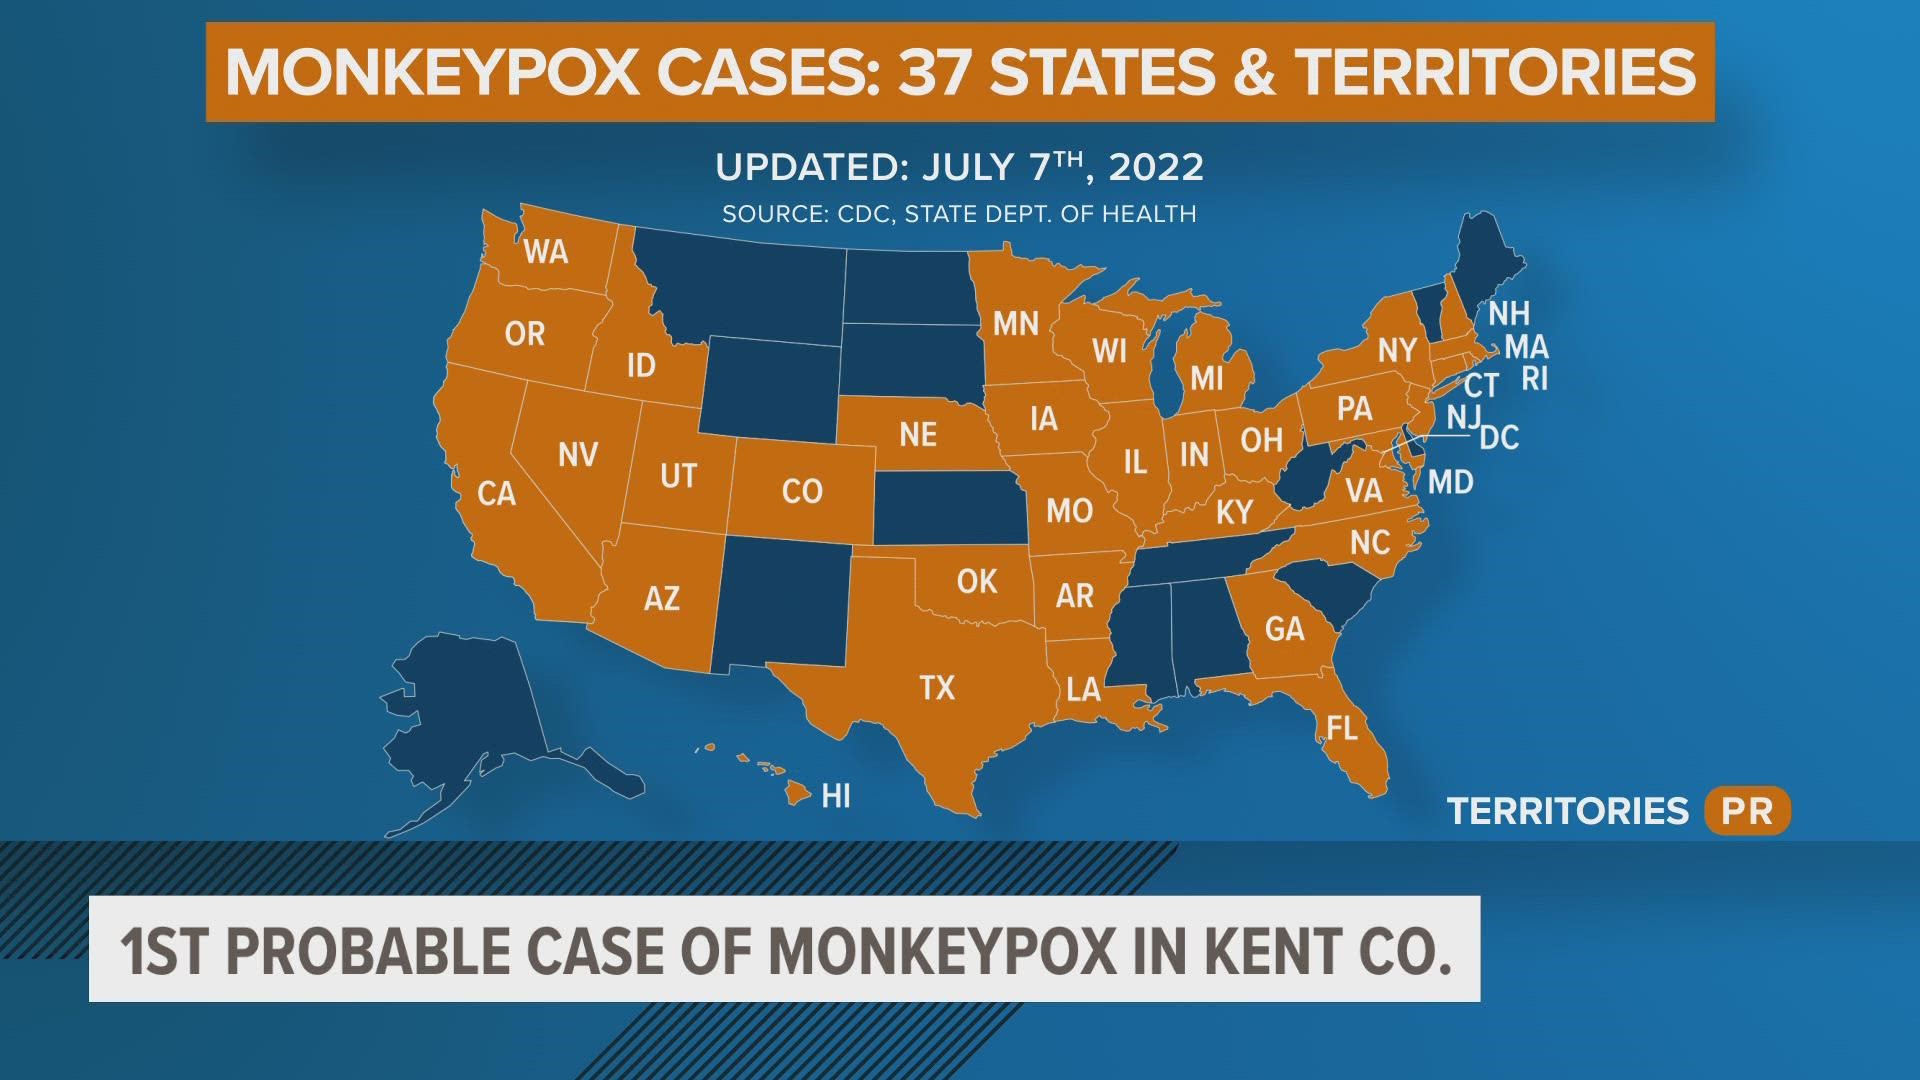 The first probably case of monkeypox was identified in Kent County, the Michigan Department of Health and Human Services discovered.